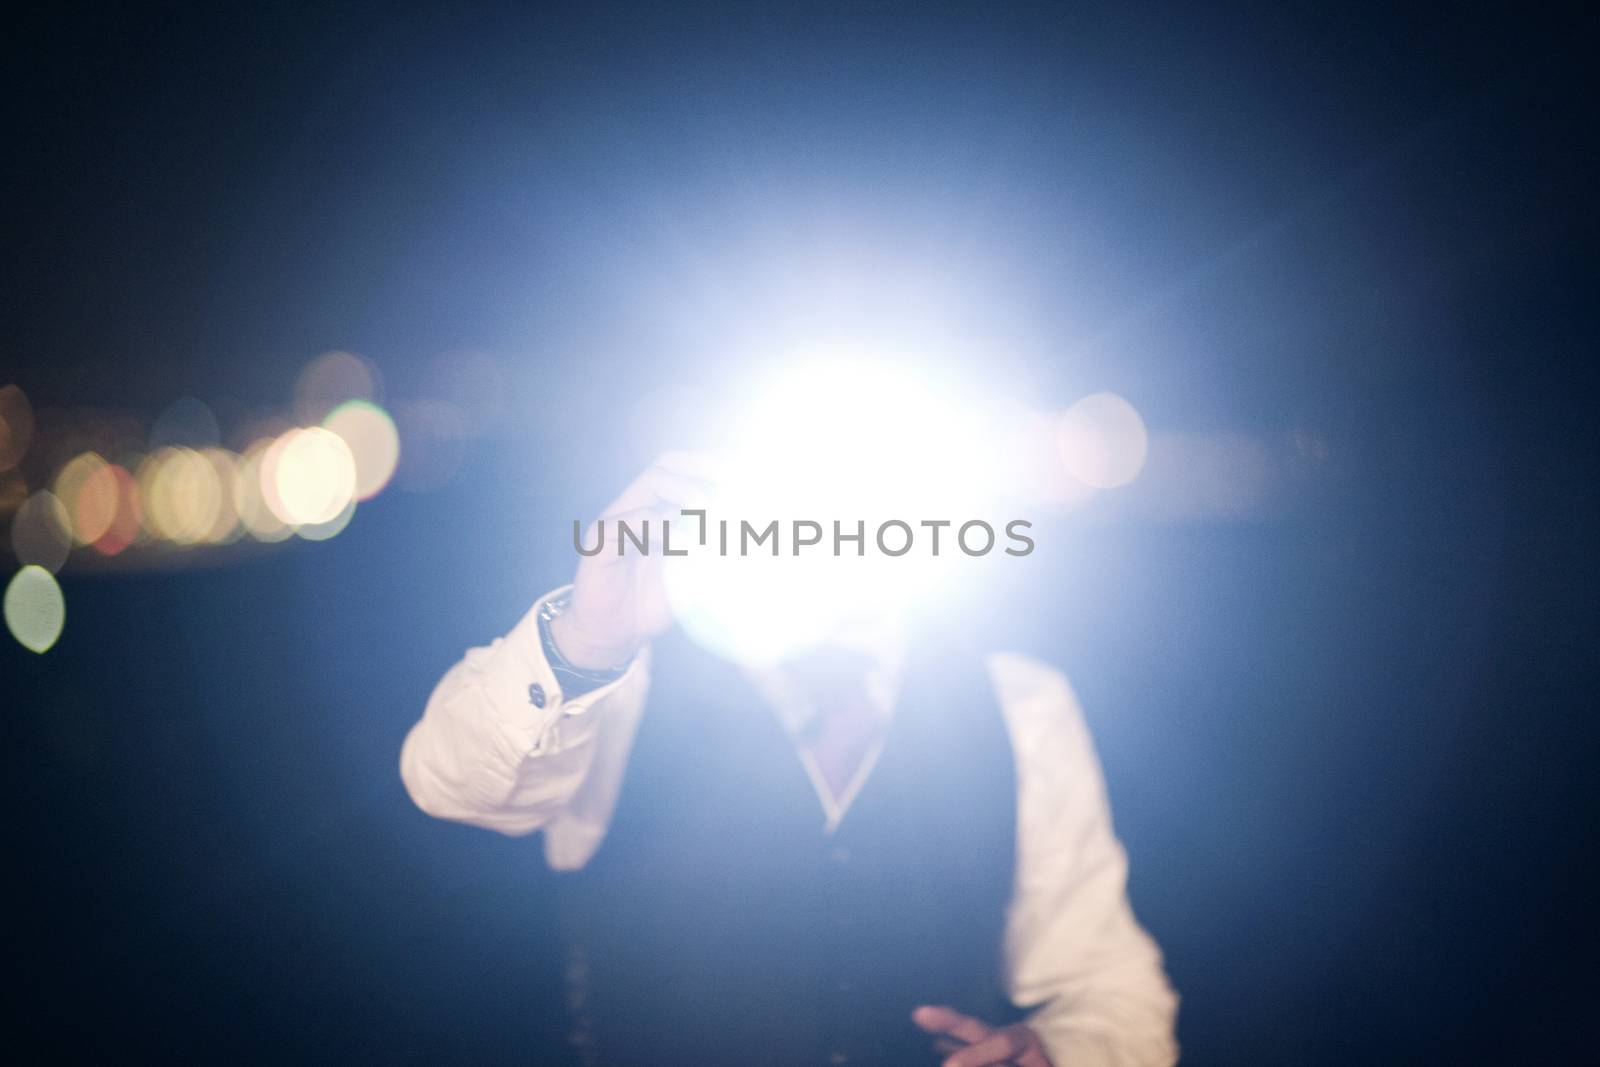 Color artistic digital rectangular horizontal photo of hand of man in dark suit and white shirt in night time wedding banquet marriage party holding camera taking a photo with flash in Barcelona Spain. Shallow depth of with background out of focus. 